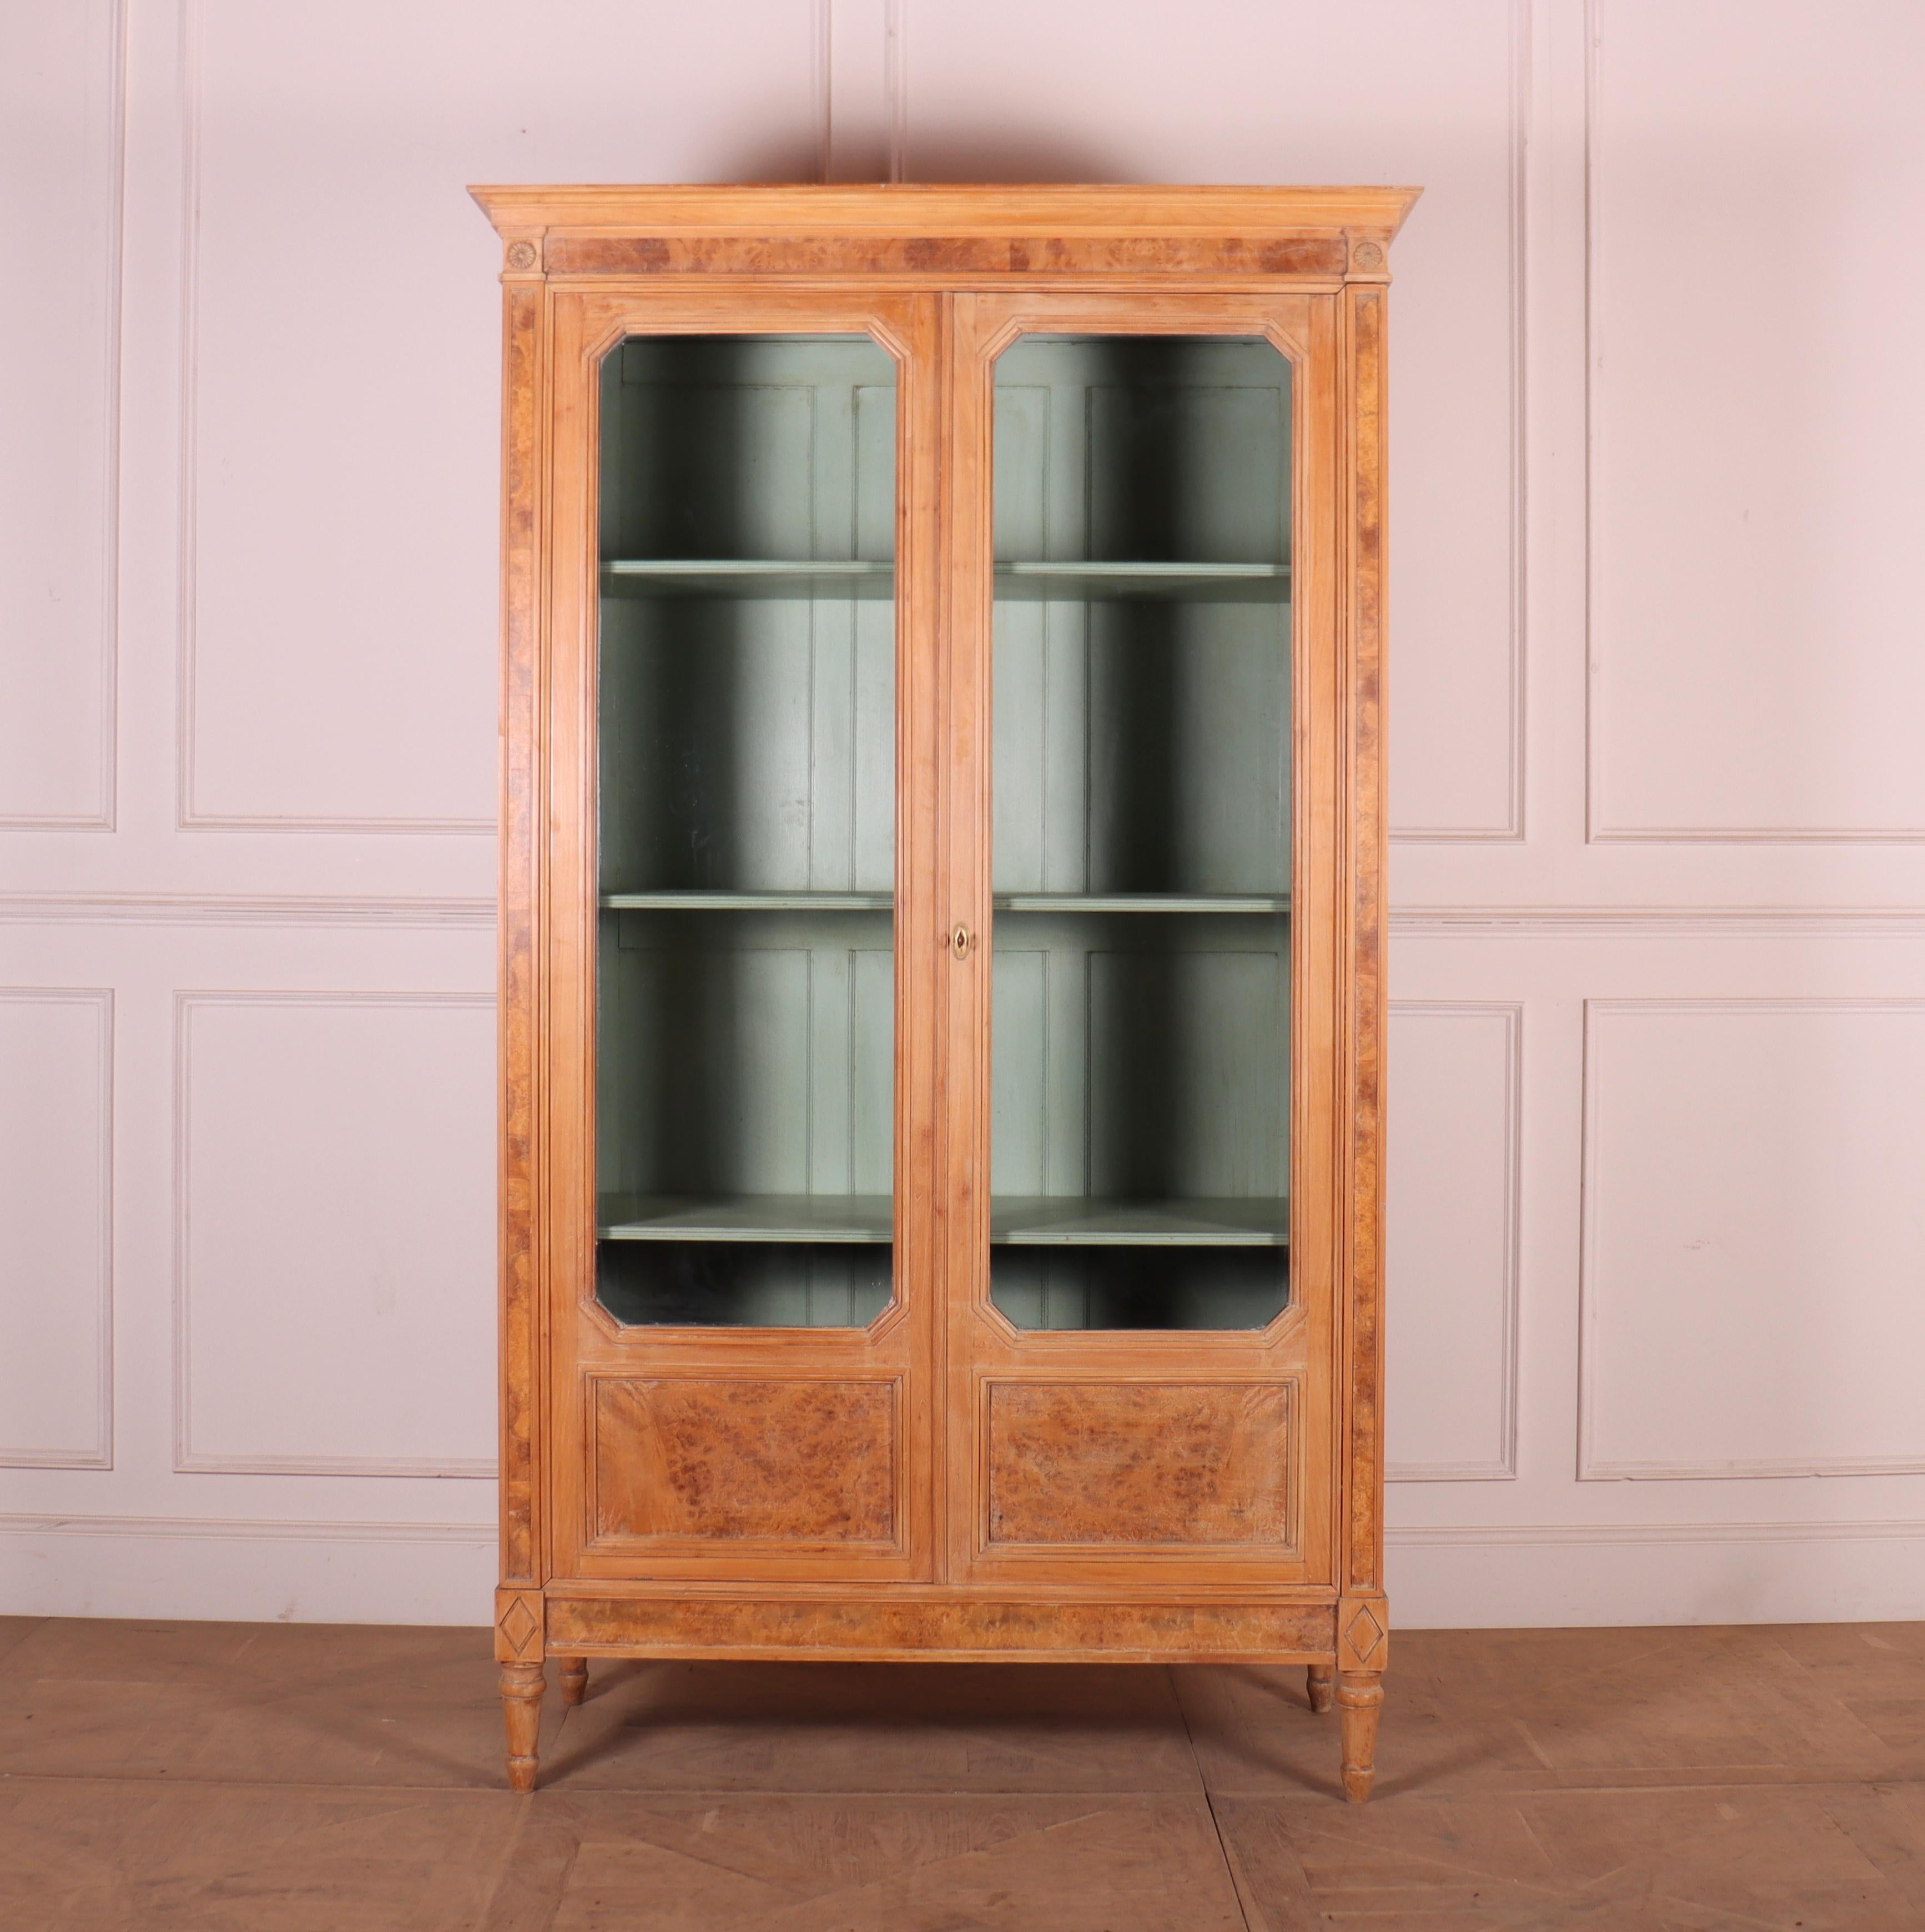 19th century French glazed walnut display cabinet. 1880.



Dimensions
50.5 inches (128 cms) Wide
22.5 inches (57 cms) Deep
86 inches (218 cms) High.